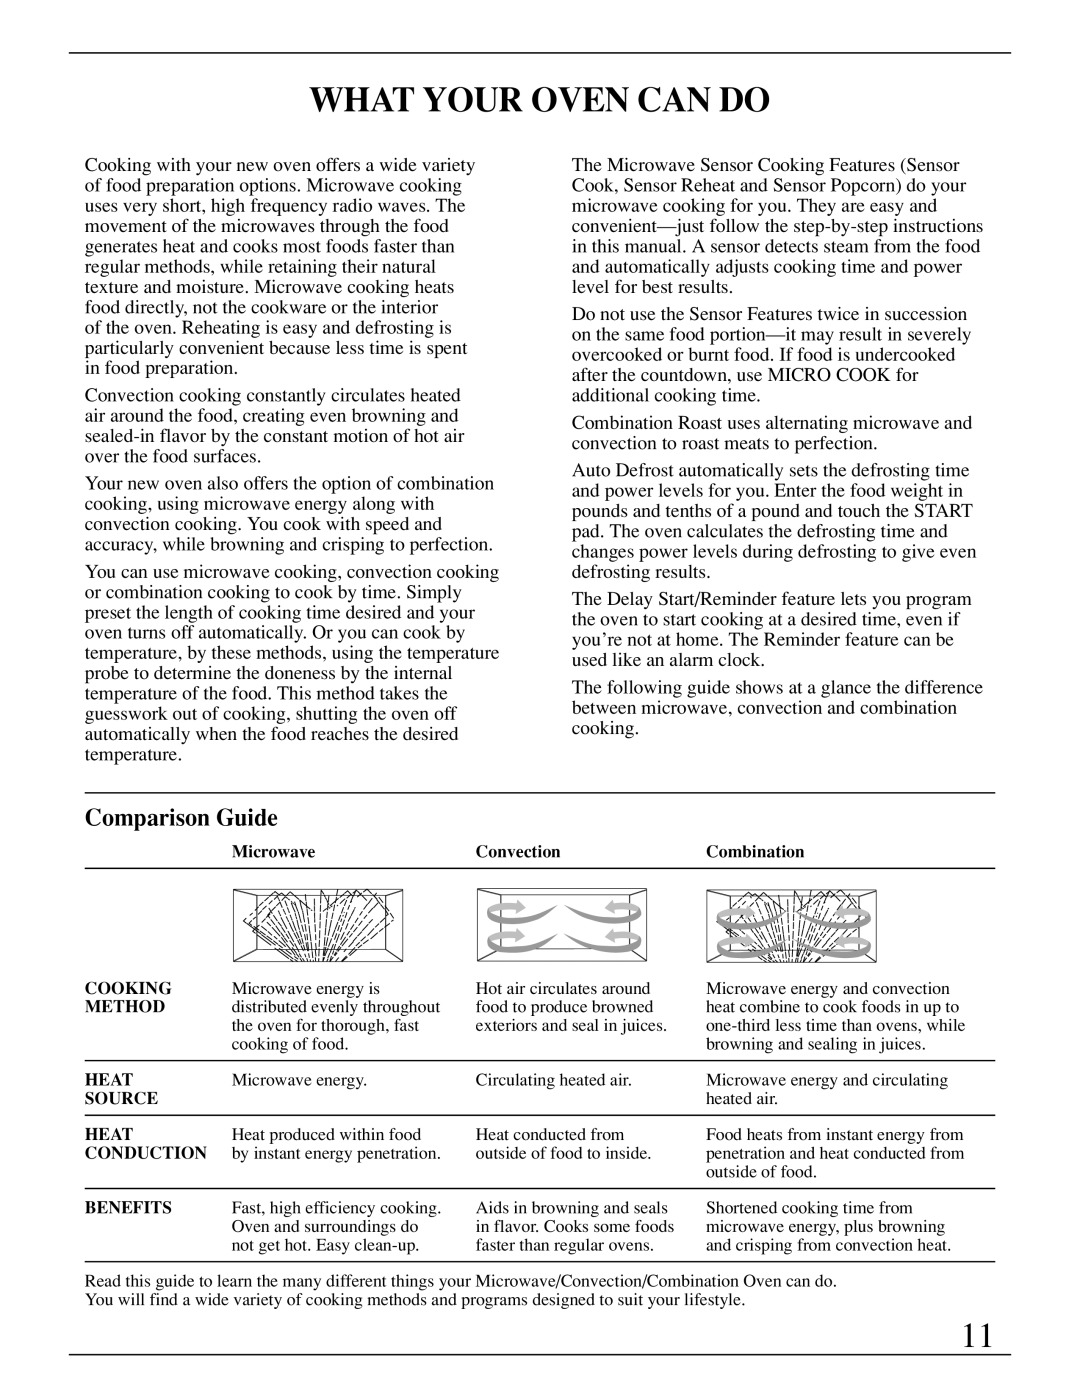 GE ZMC1095 owner manual What Your Oven can do, Comparison Guide 